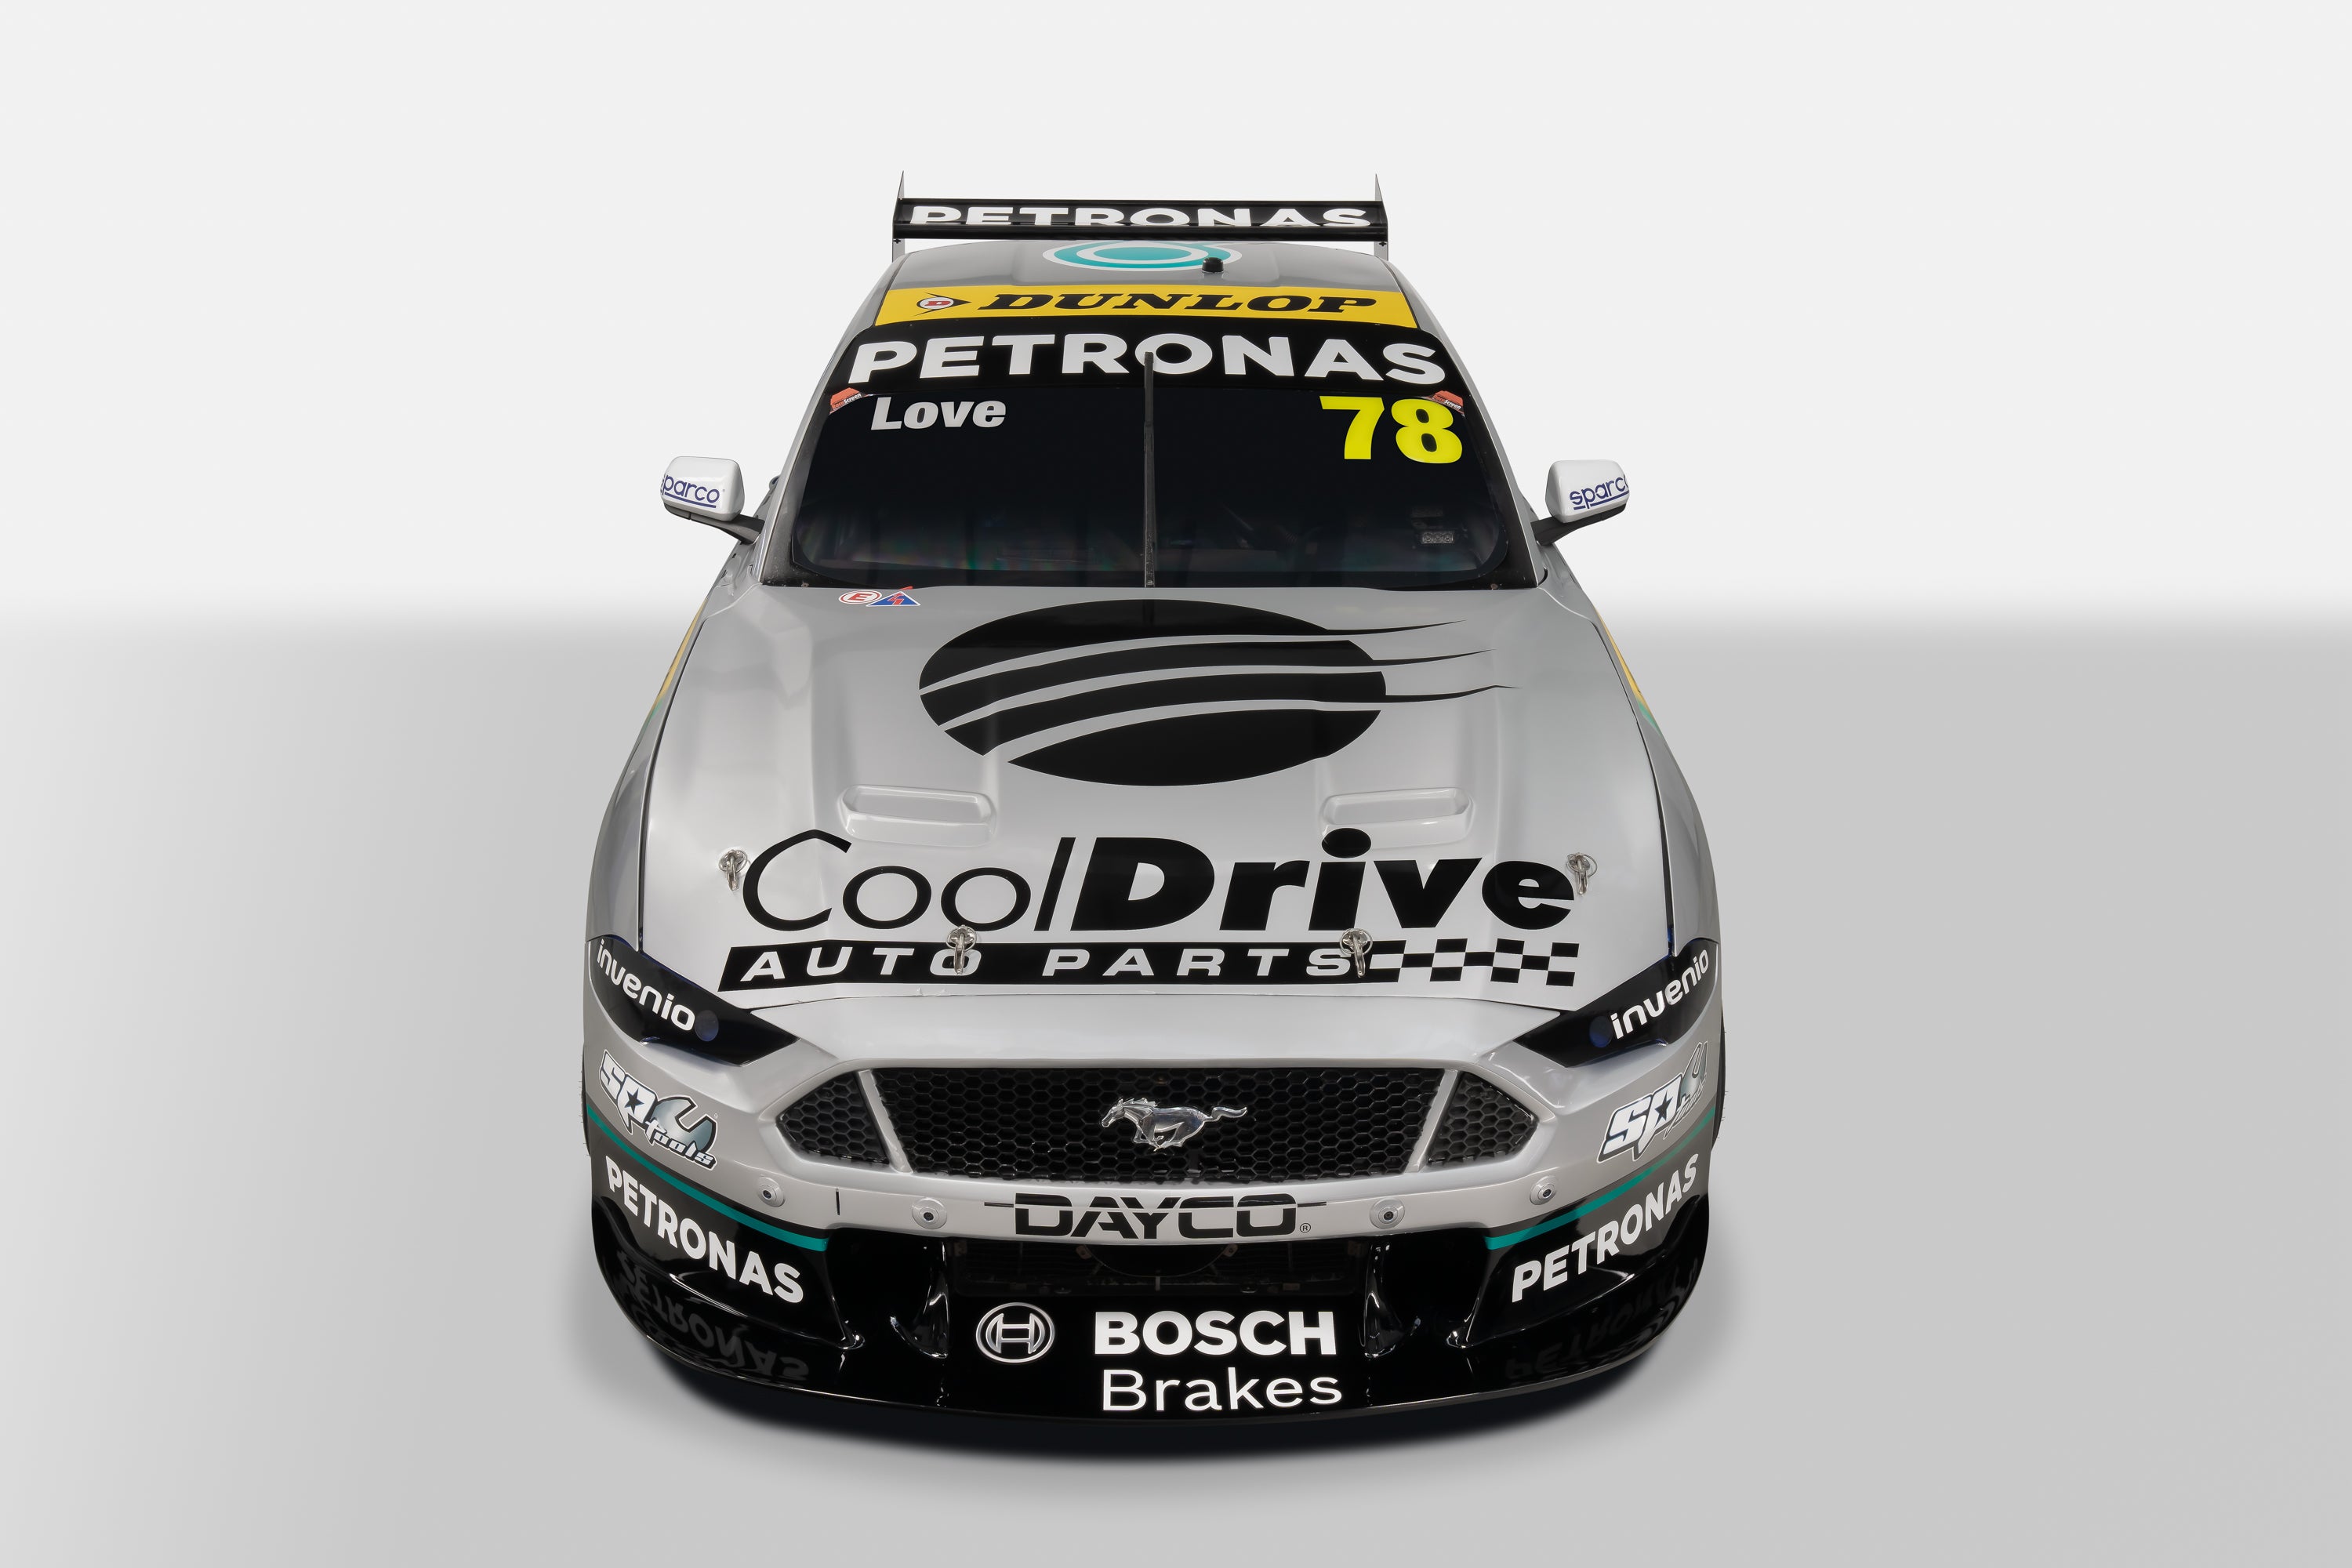 PETRONAS Lubricants Comes to Super2 in 2023 with the Blanchard Racing Team